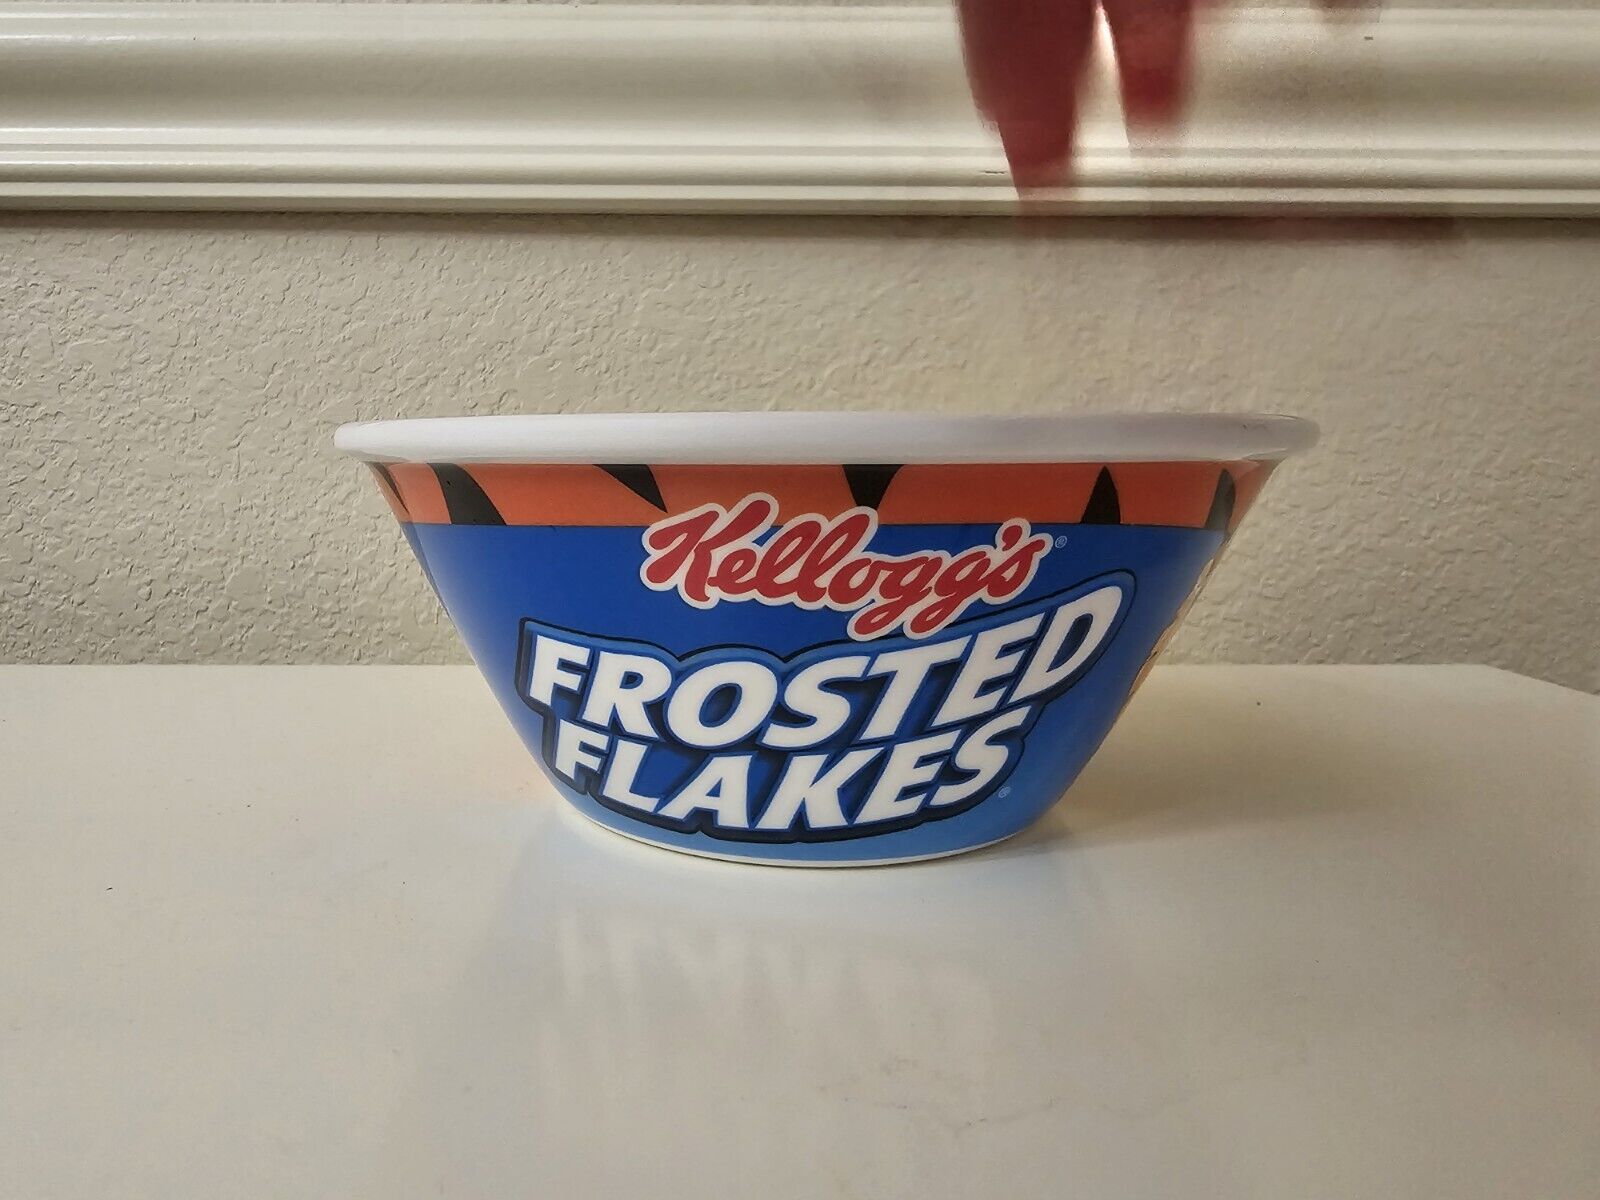 Kellogg’s Frosted Flakes Tony the Tiger Cereal Bowl 2011 